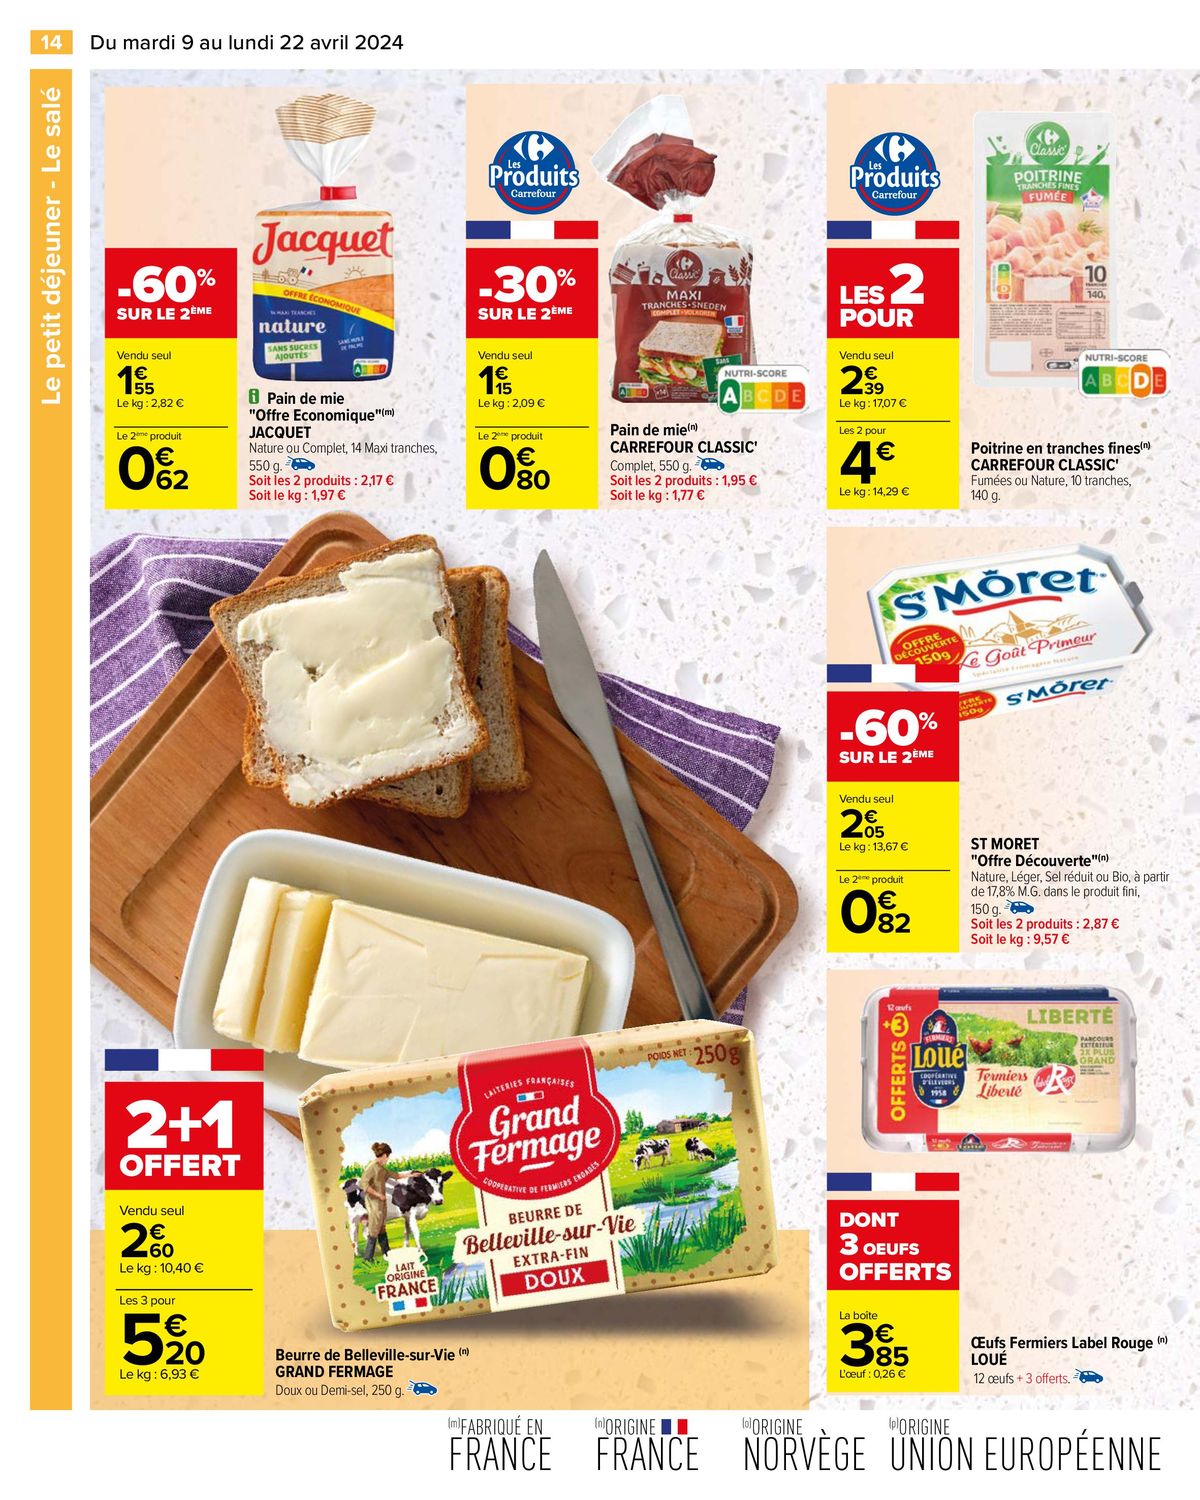 Catalogue OFFERT Carrefour Drive , page 00016